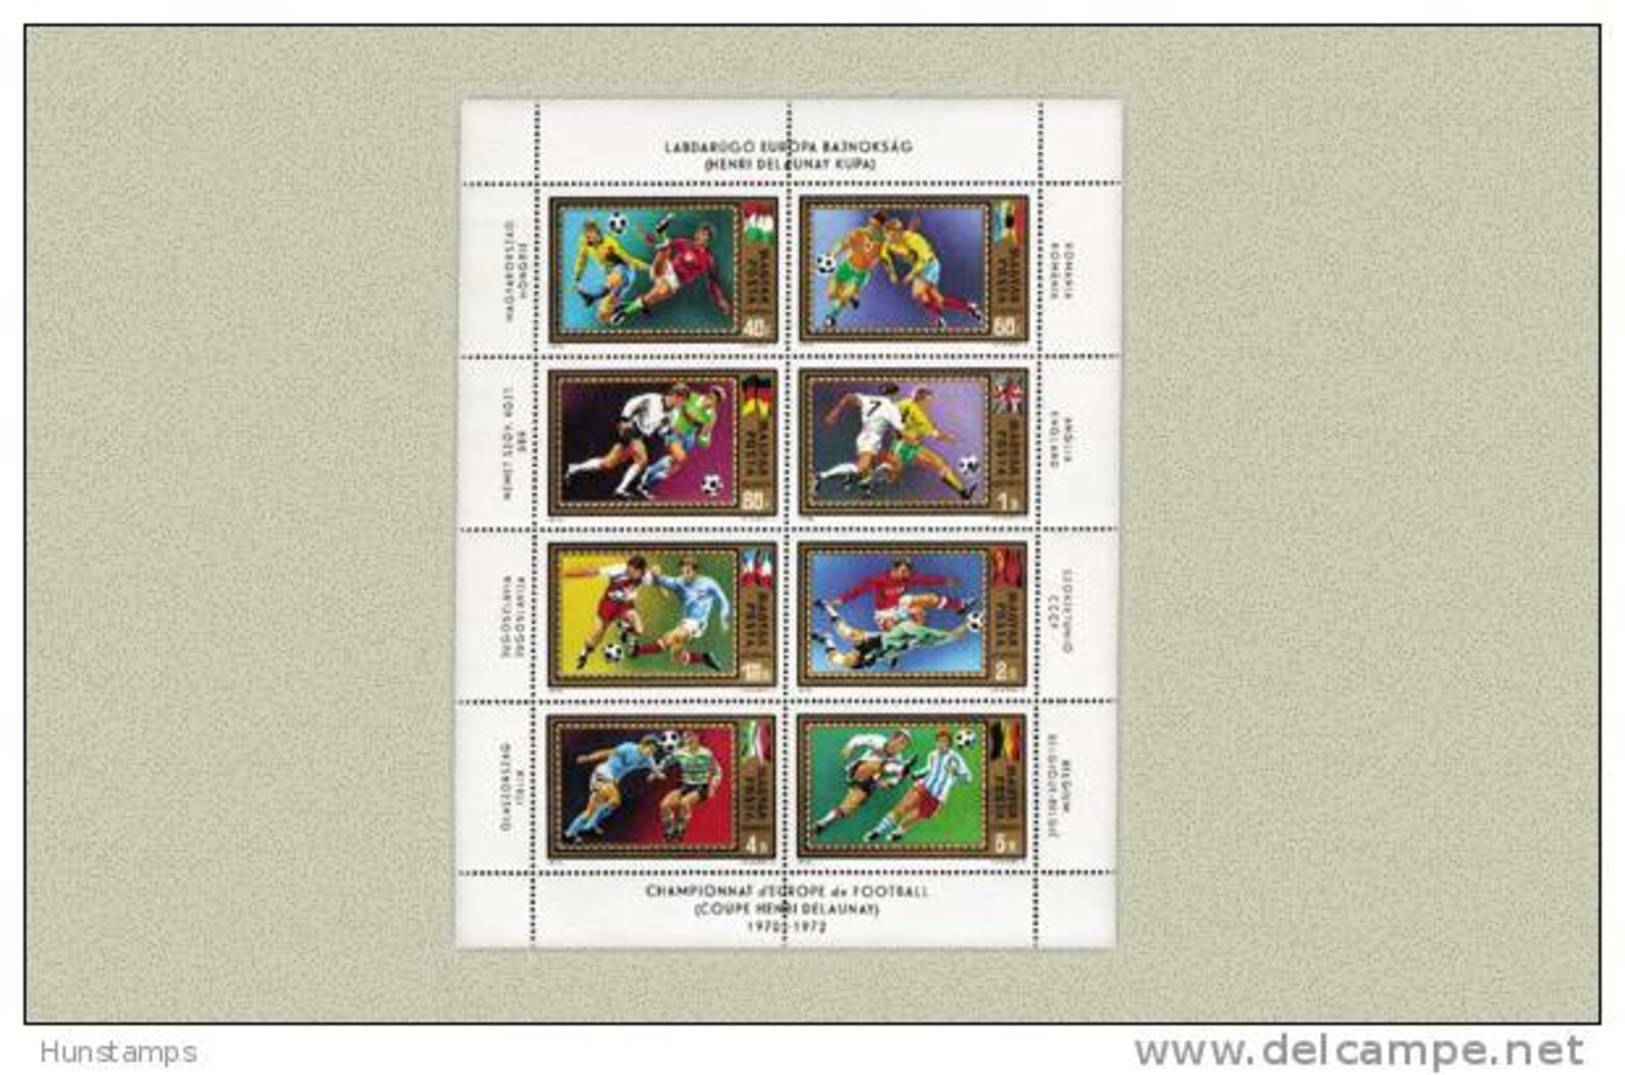 Hungary 1972. Football - Soccer European Championship Complete Sheet MNH (**) Michel: 2751-2758 / 8.50 EUR - Emisiones Locales